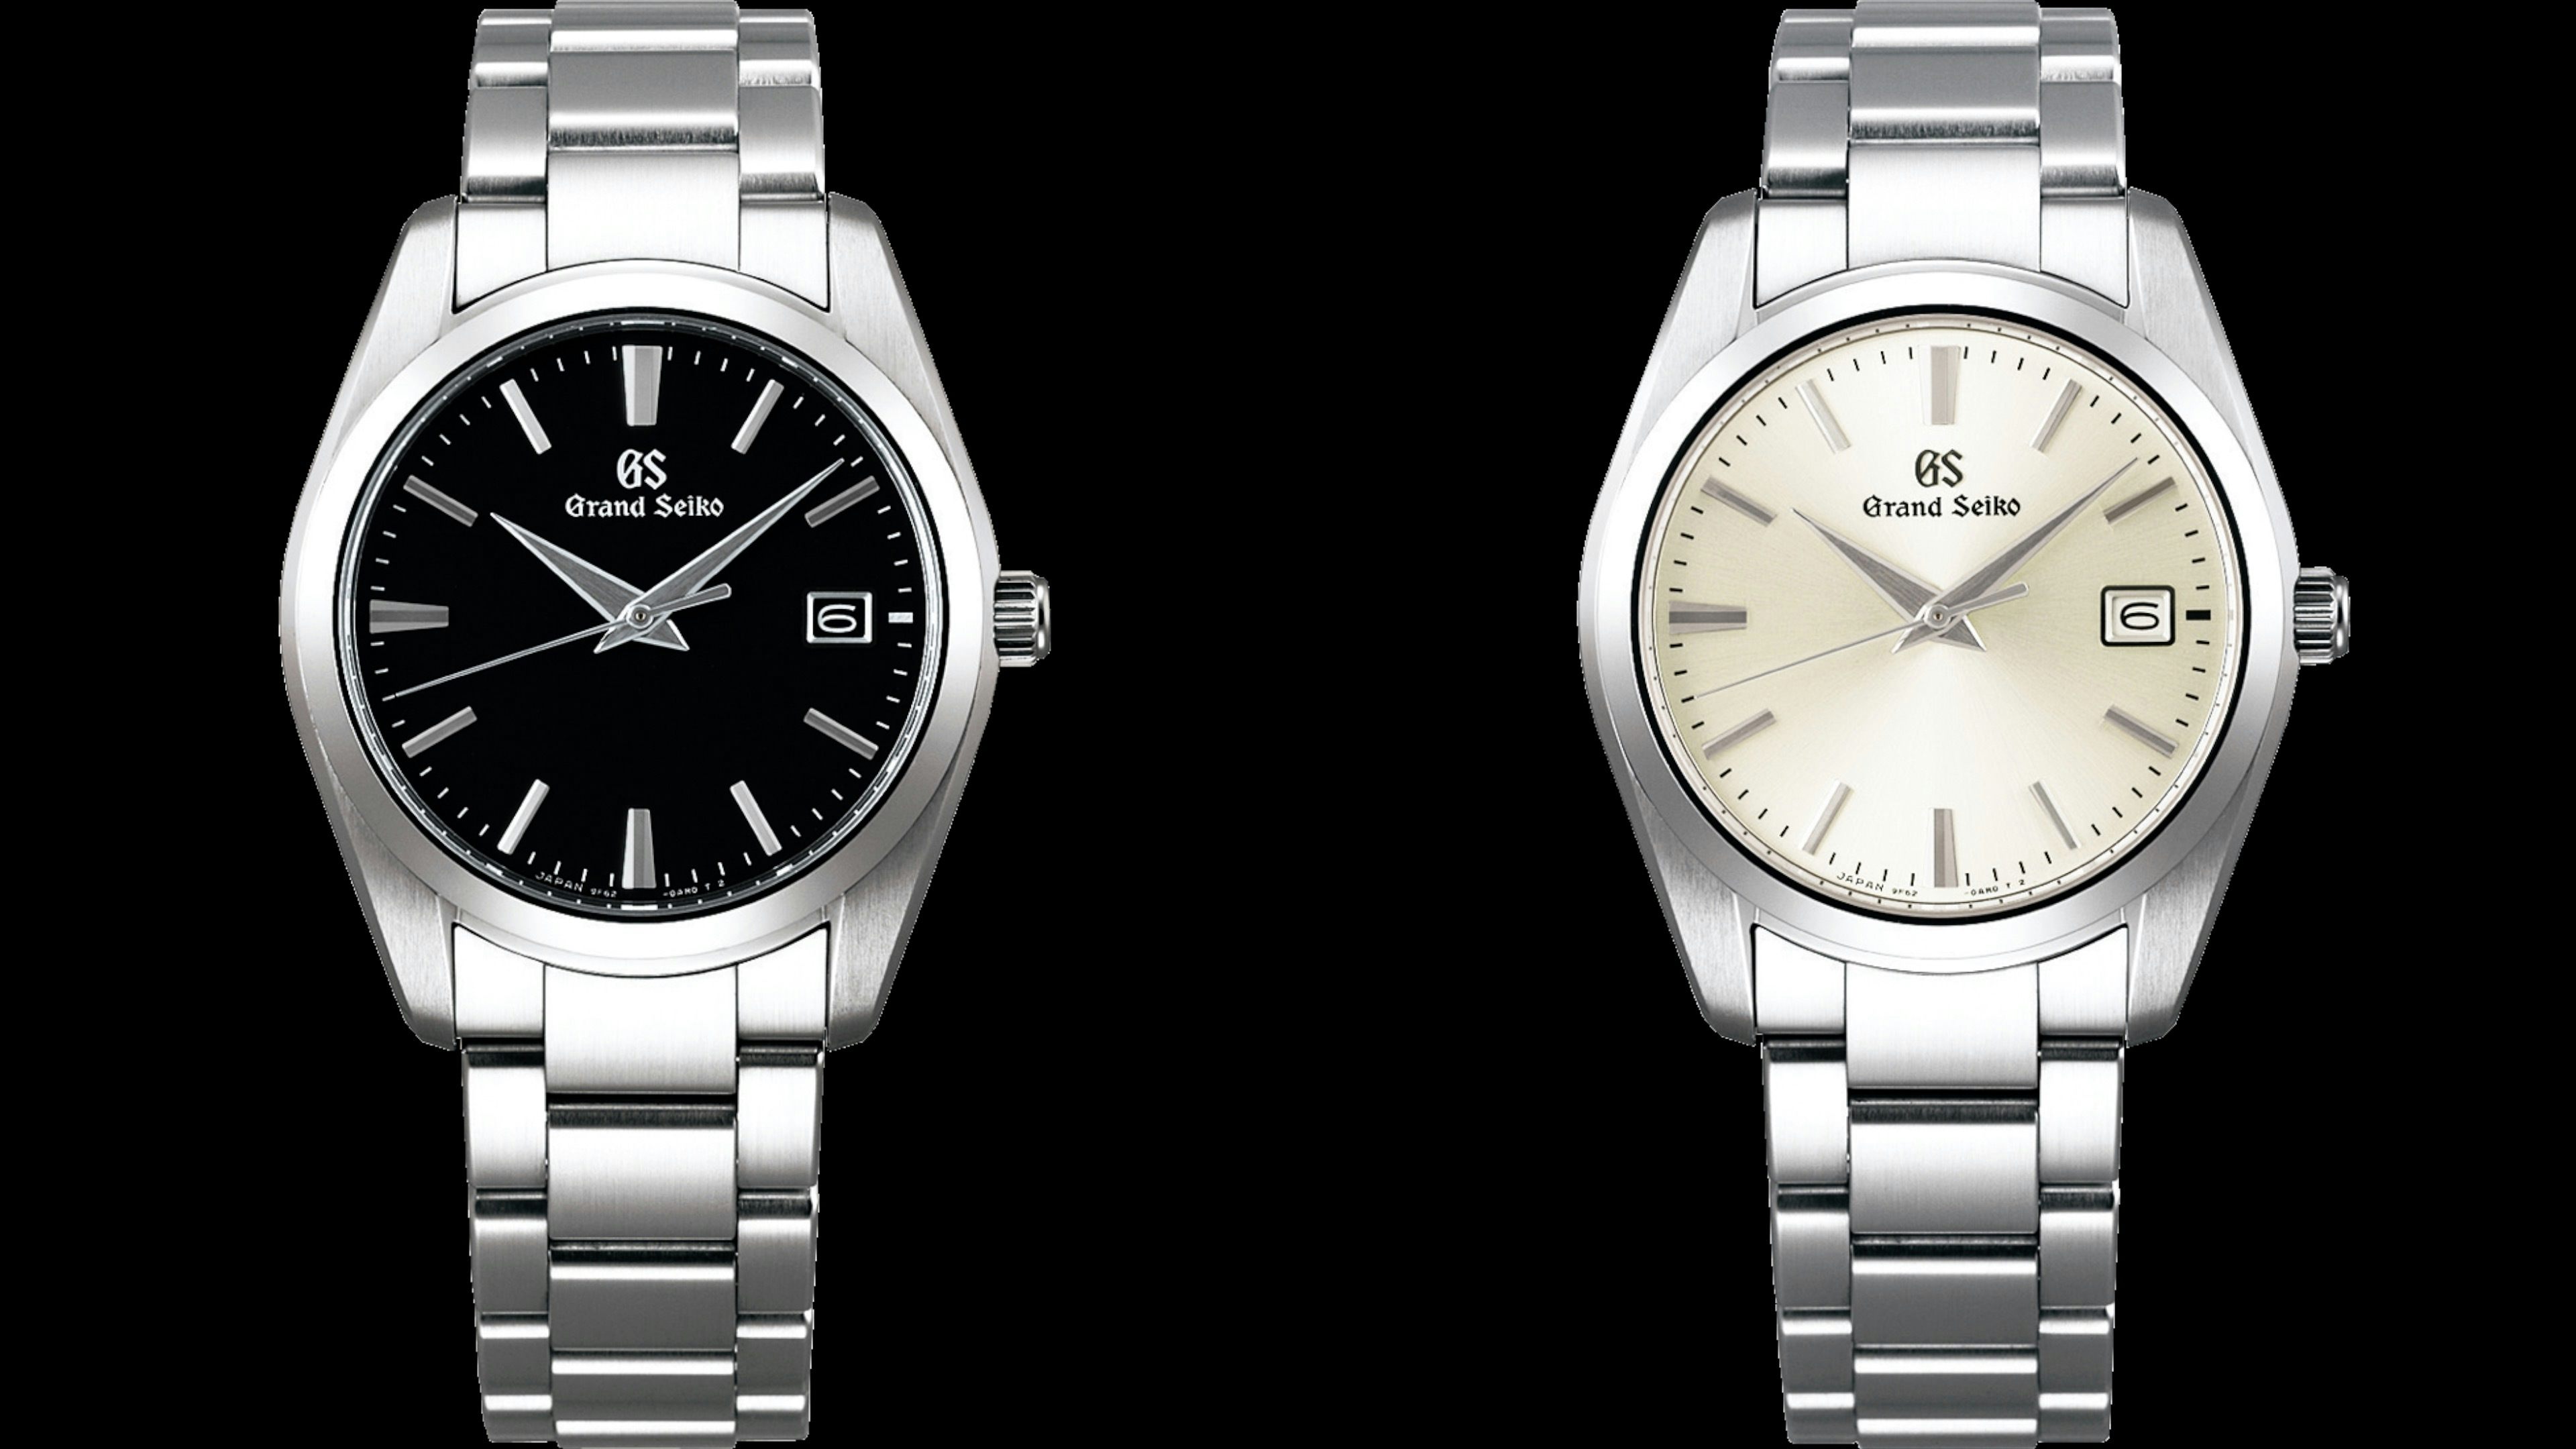 Skøn Tante gift Grand Seiko's Least Expensive Watches Are the Quartz SBGX261 and SBGX263